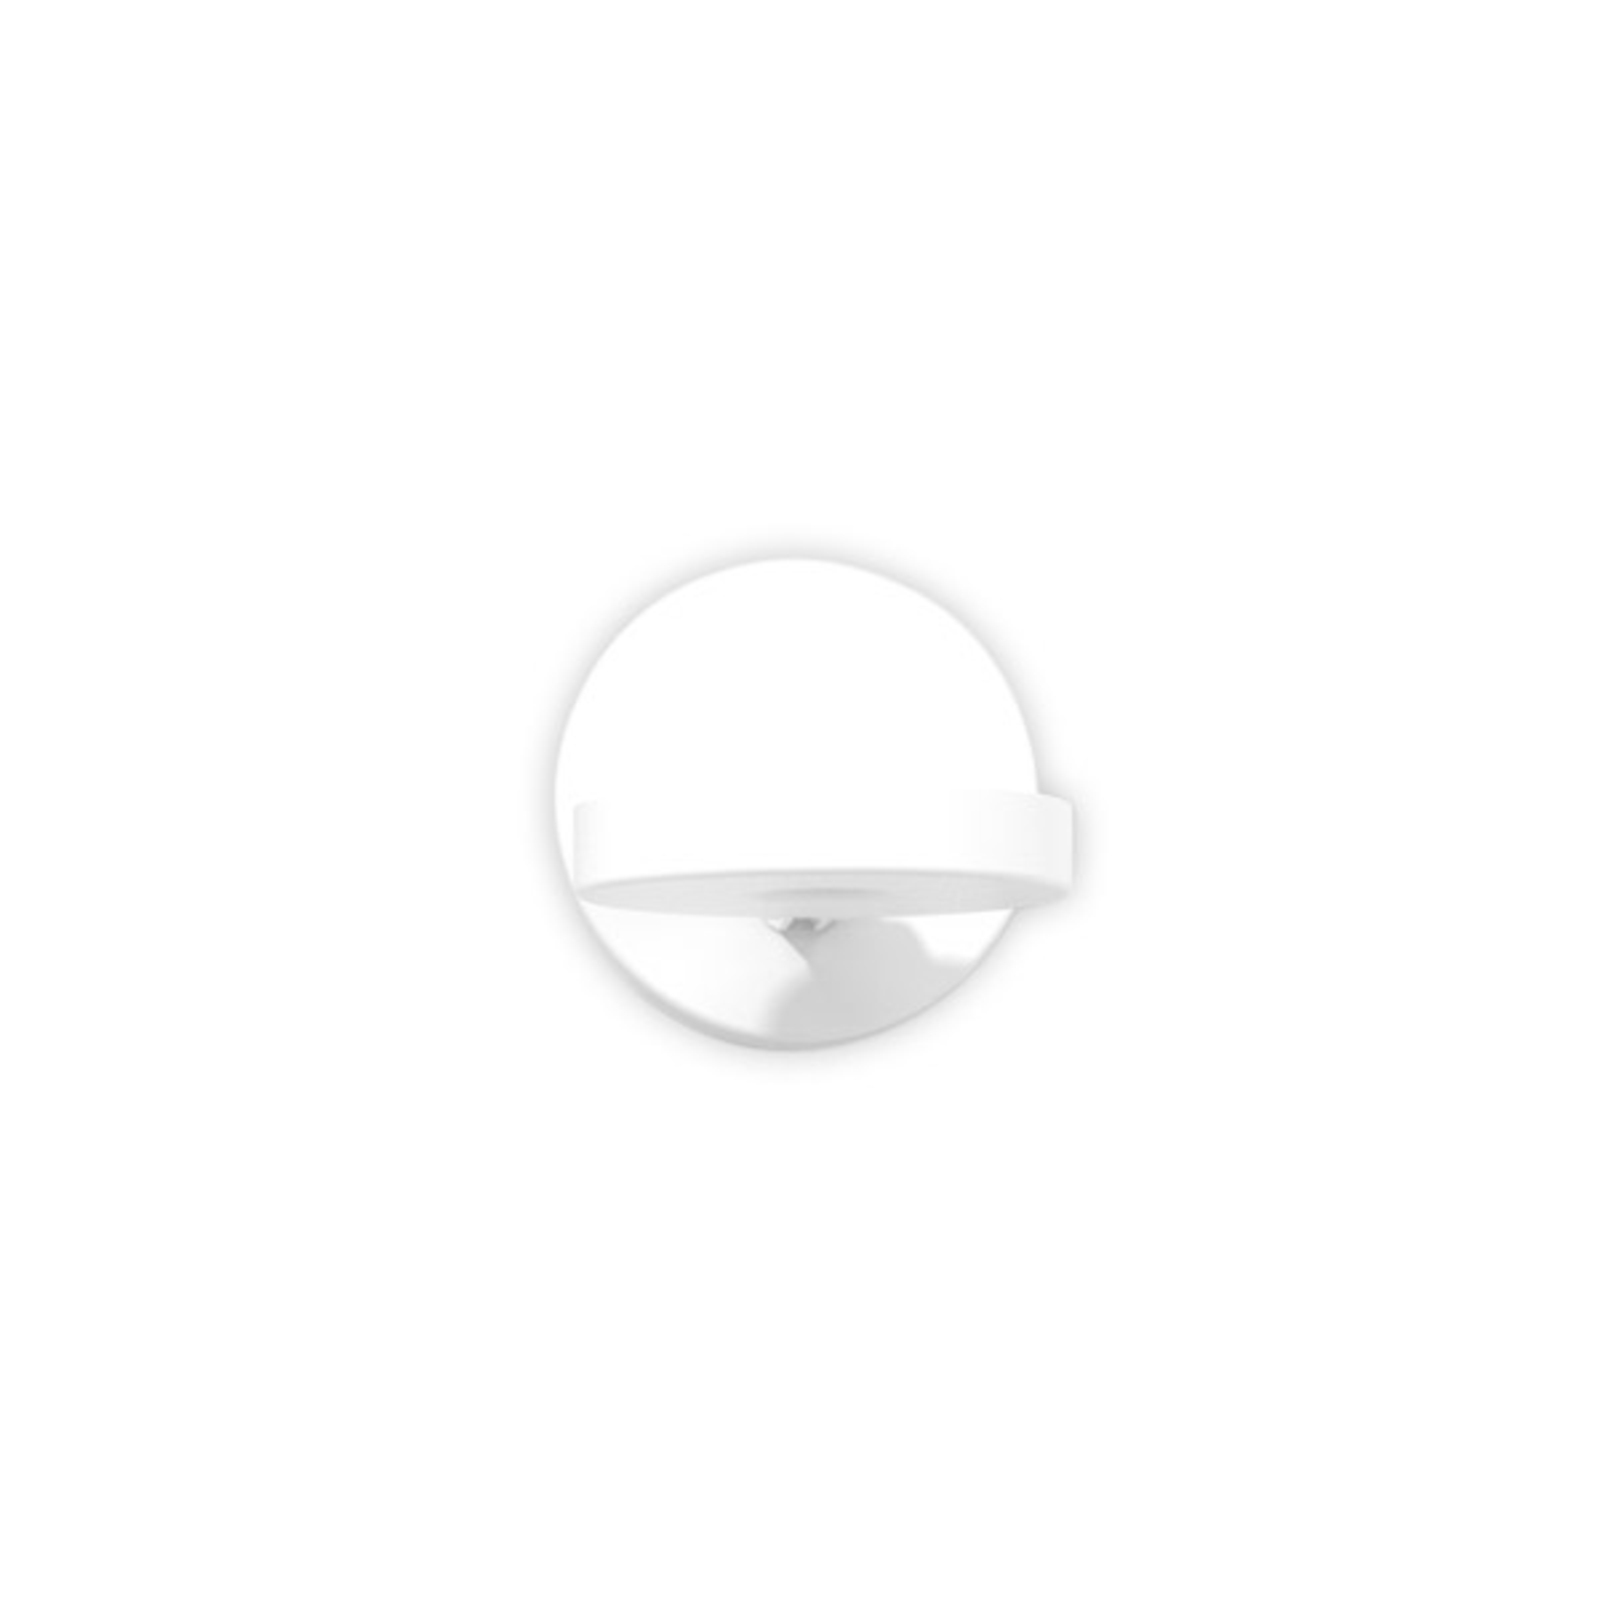 Rotaliana String H0 DTW LED wall light white